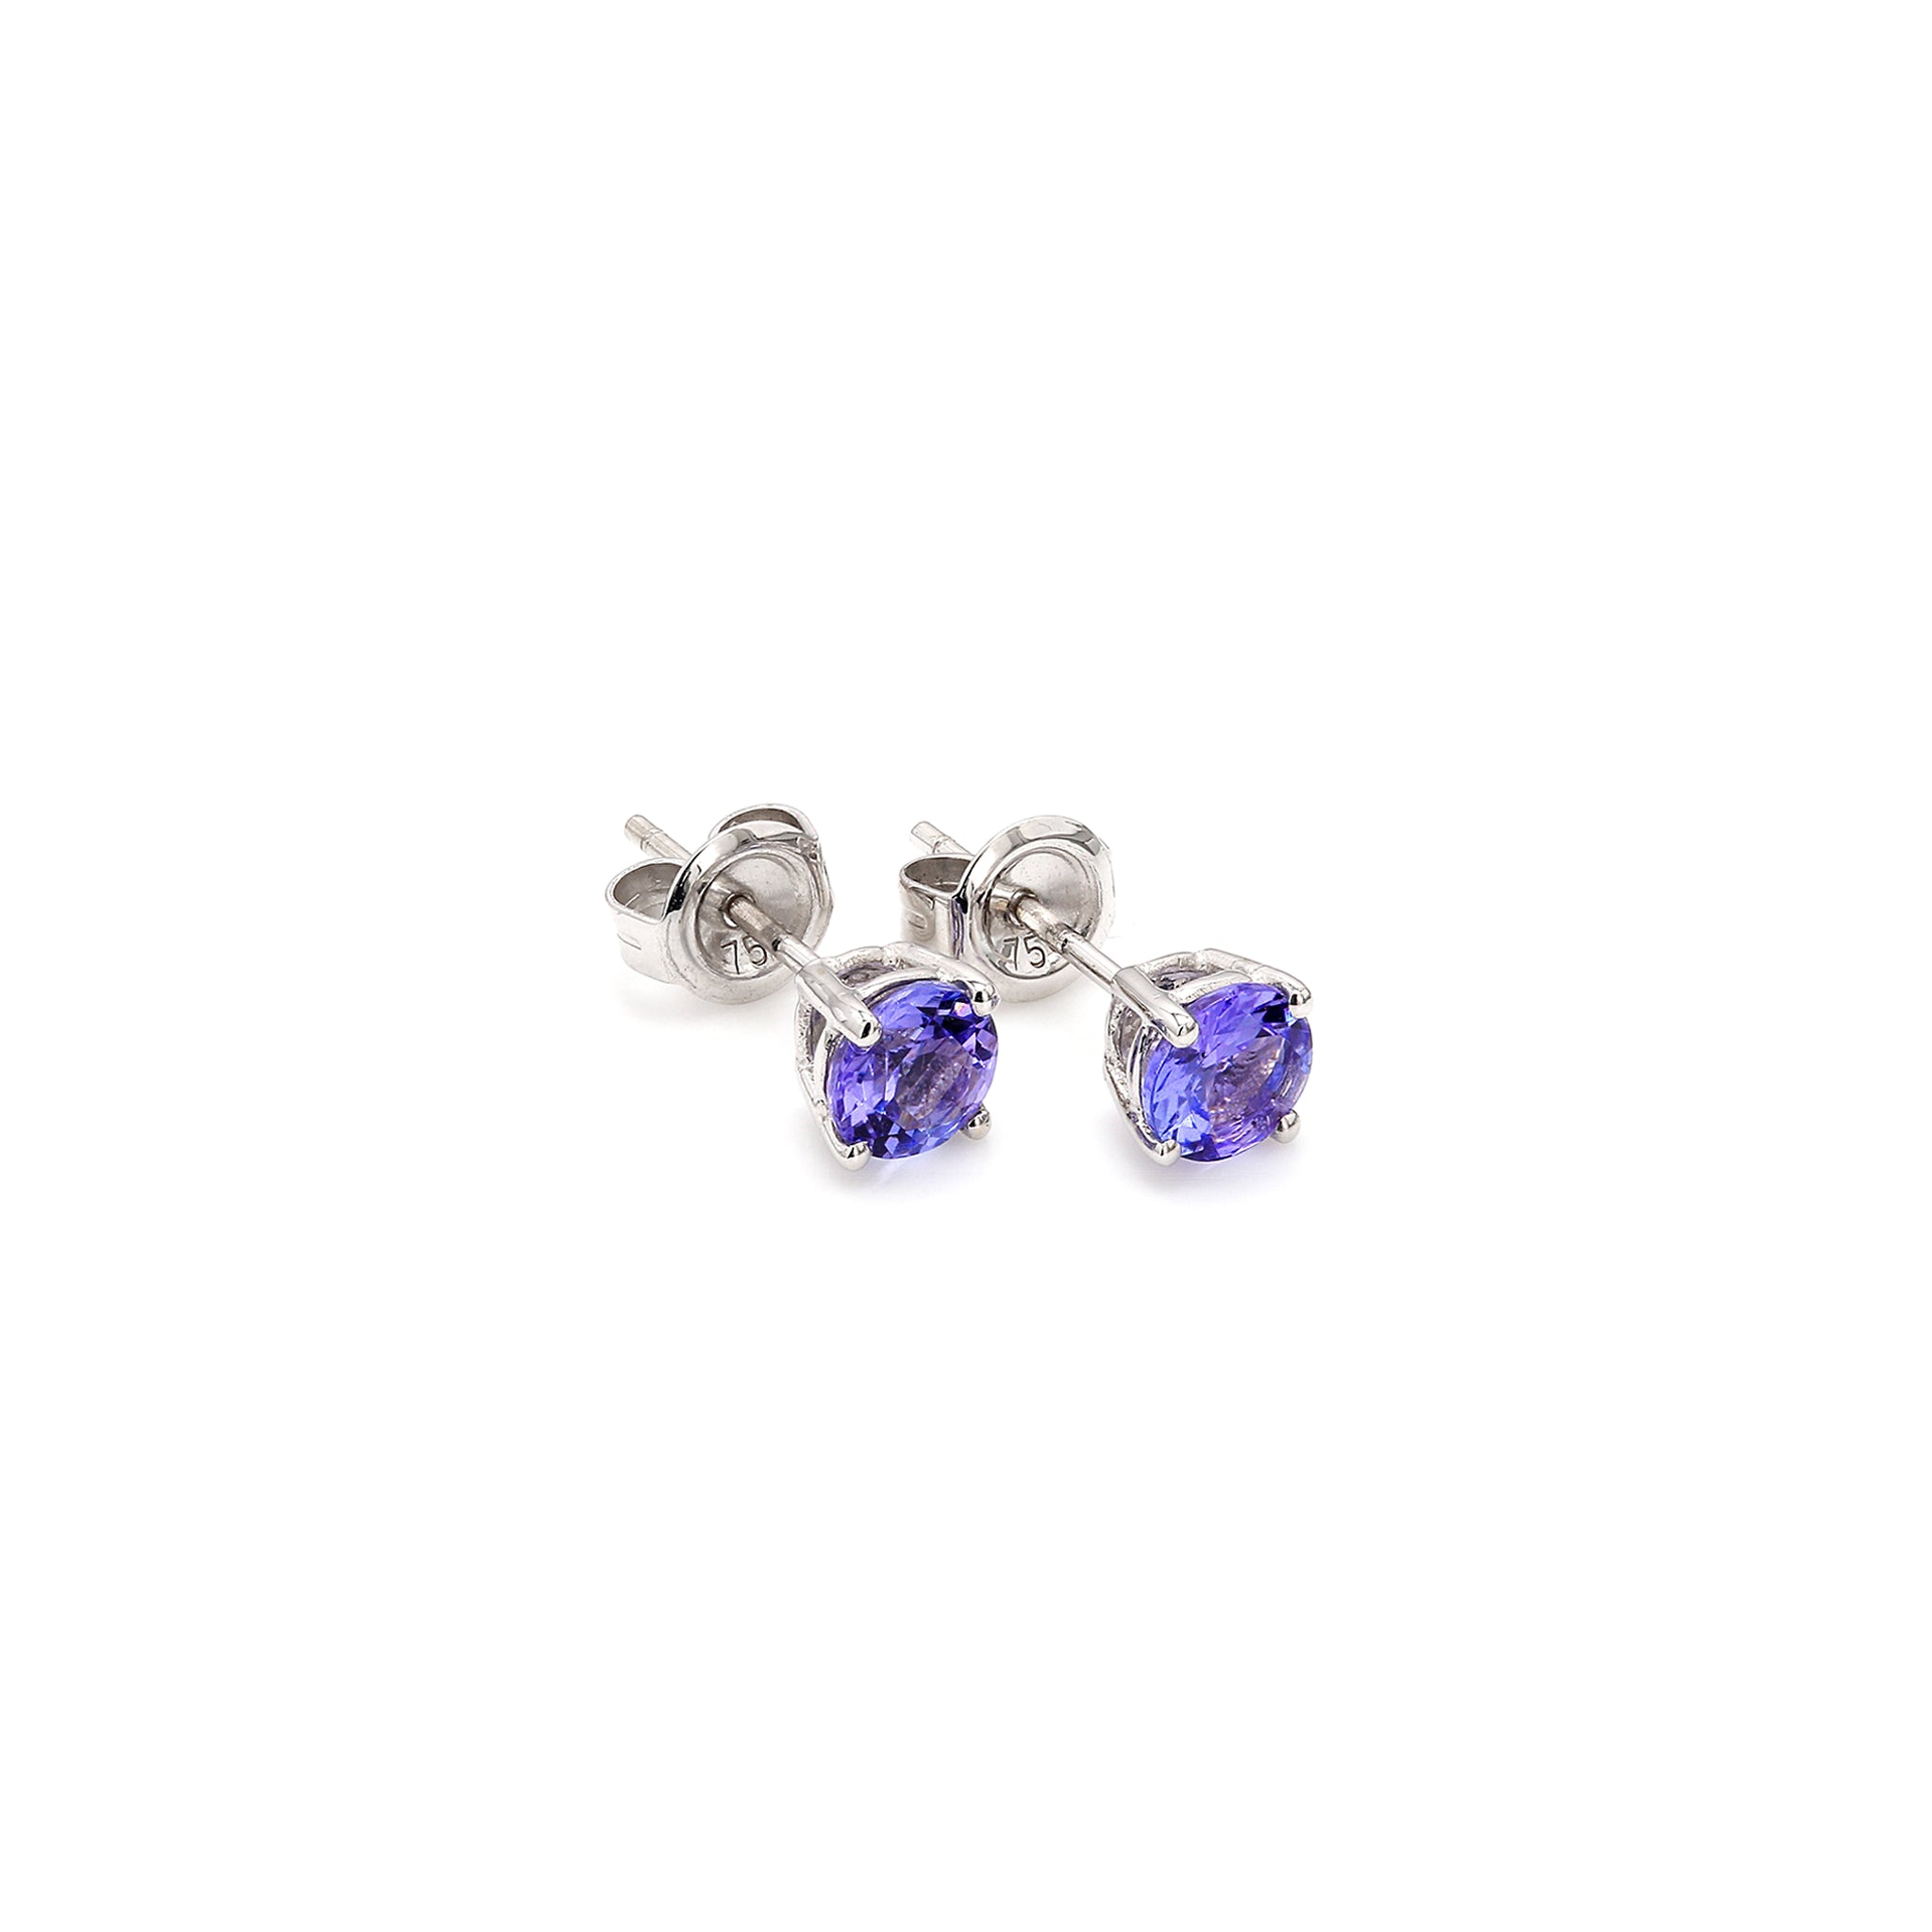 Shimansky - Tanzanite Solitaire Stud Earrings 1.00ct crafted in 14K White Gold